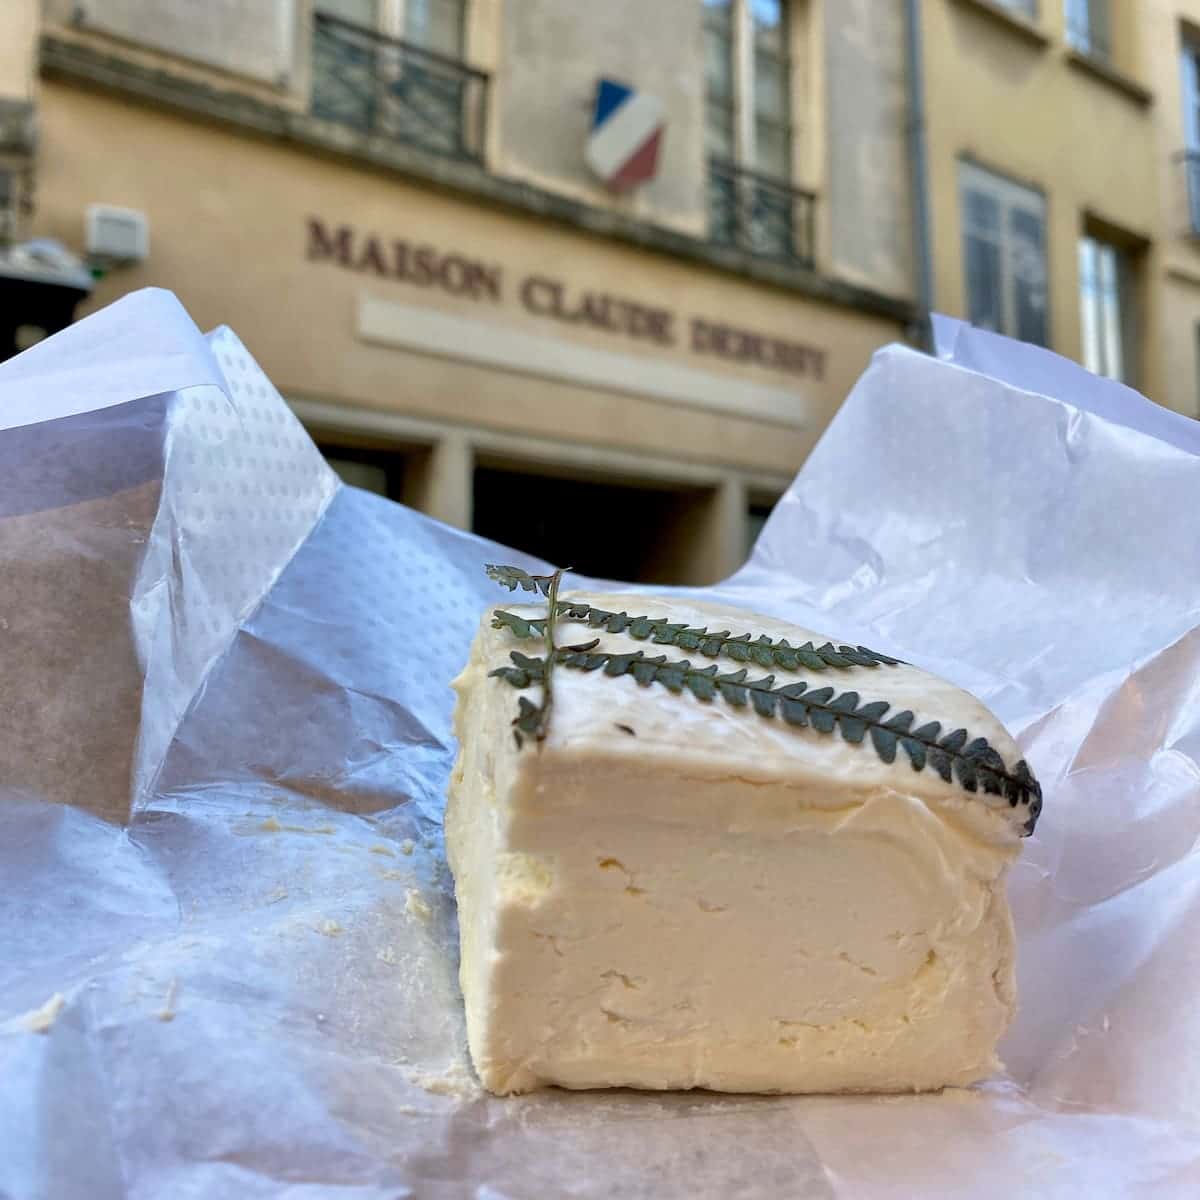 creamy French cheese in its paper